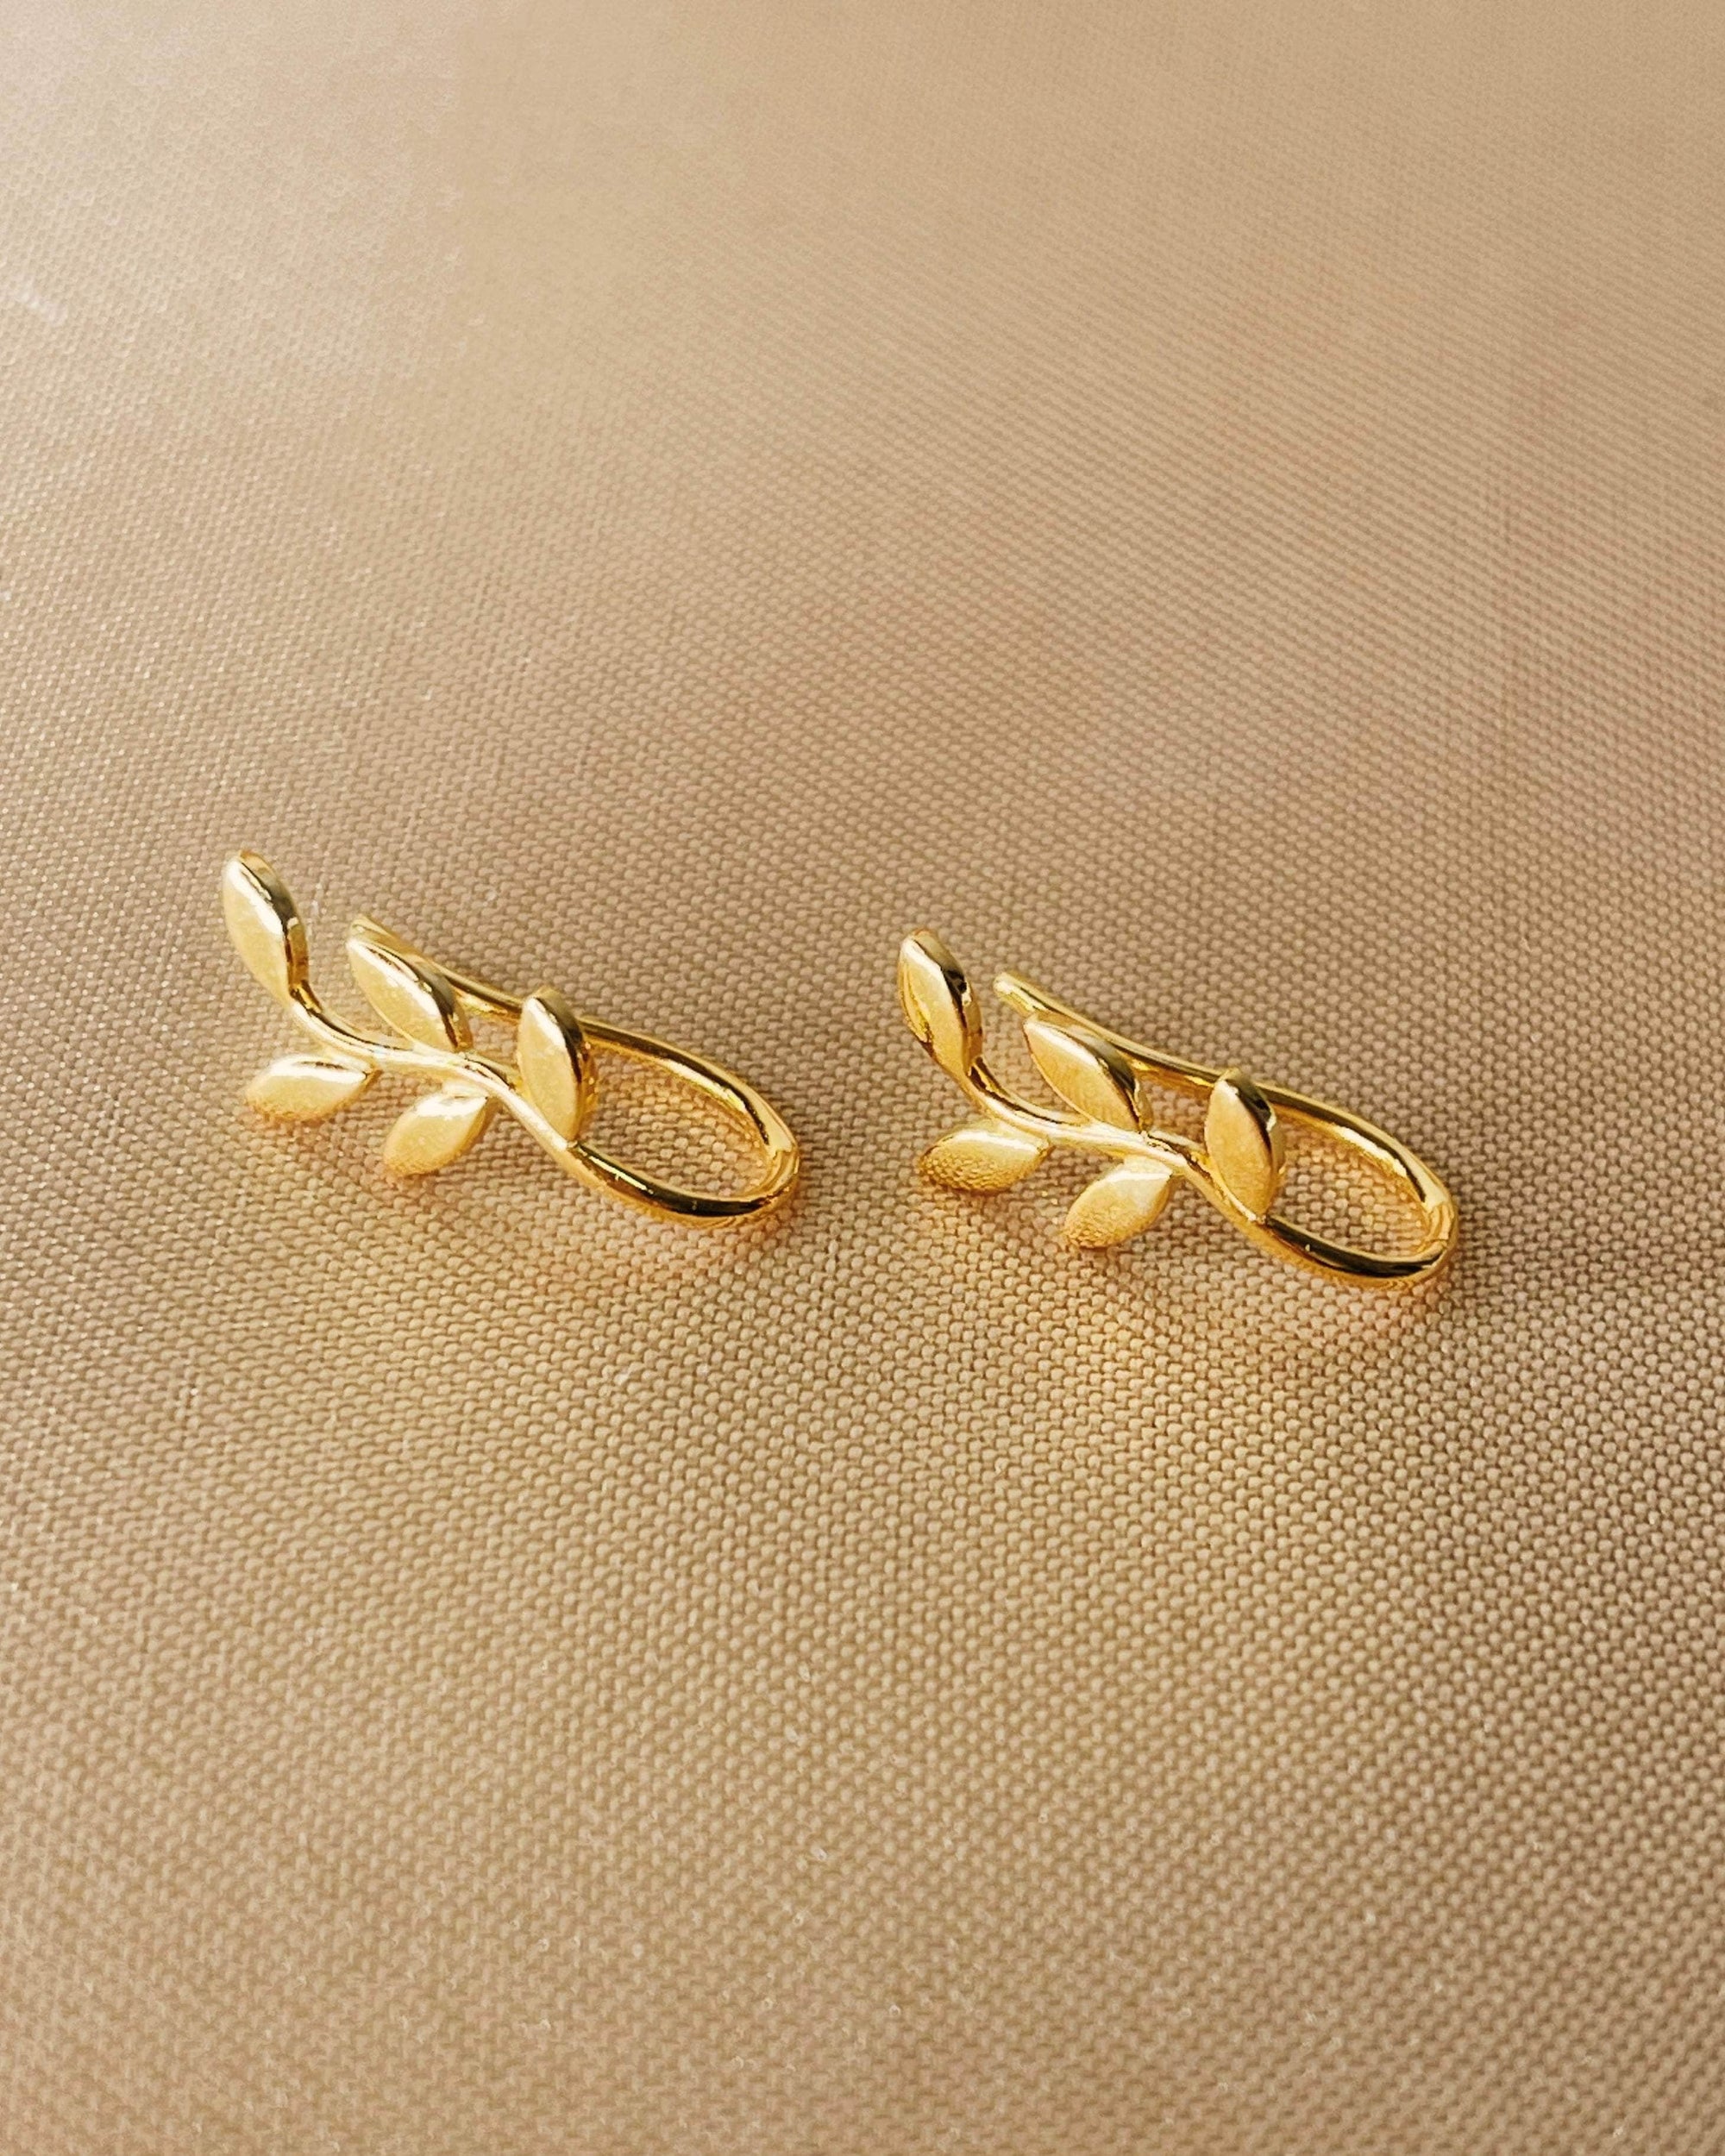 So Dainty Co. Climbers Autumn Gold Climber Earrings Gold Plated 925 Sterling Silver Jewelry